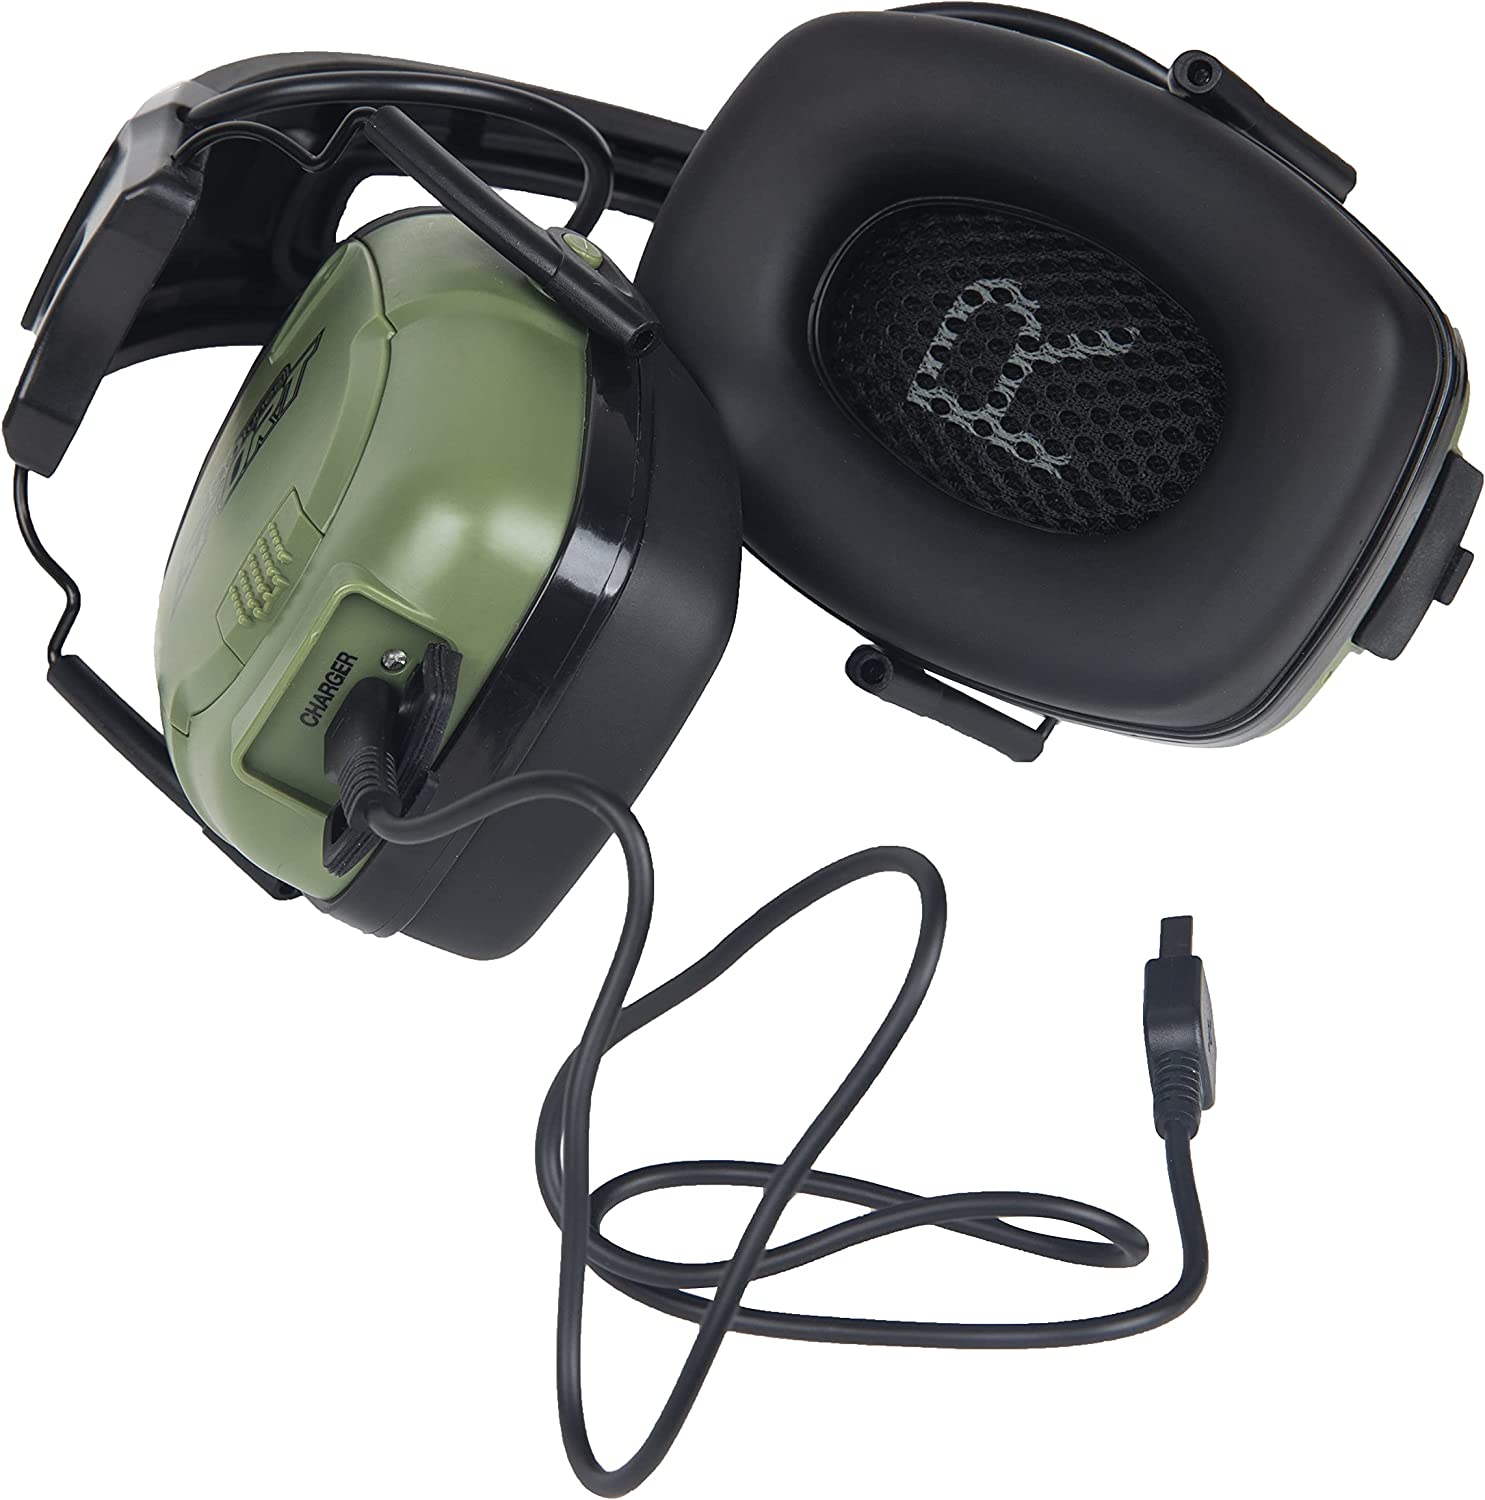 inner view of the Rechargeable Bluetooth Hearing Protection